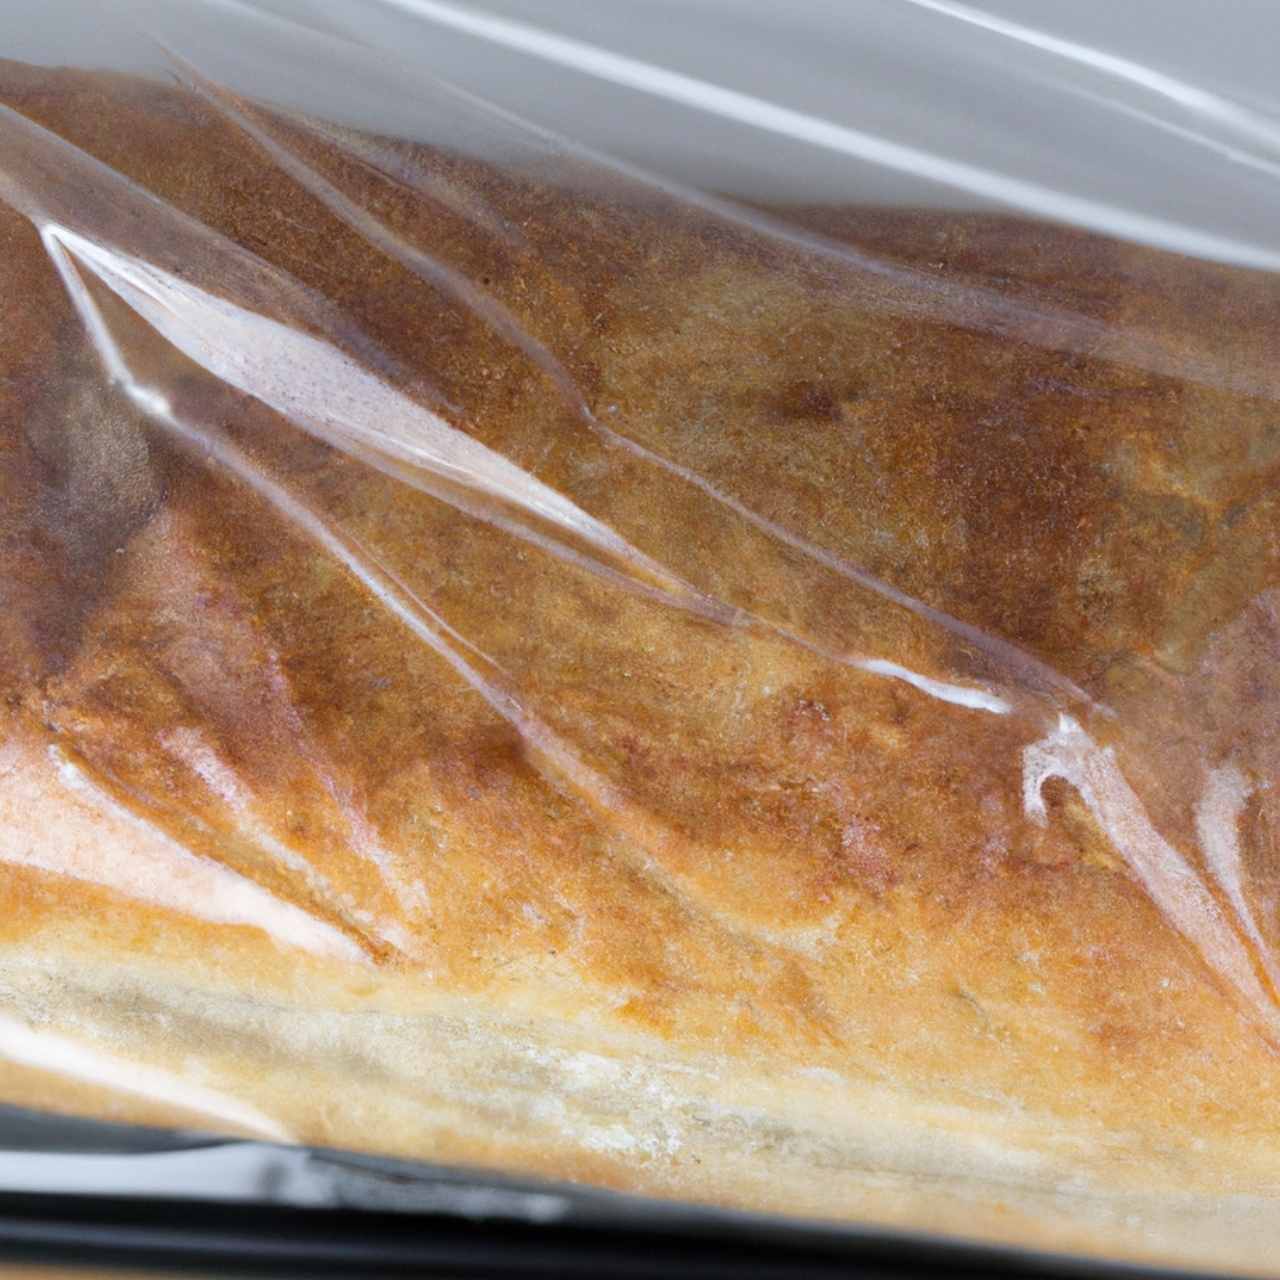 How To Store Ciabatta, Keep it Fresh and To Stop Mold Forming